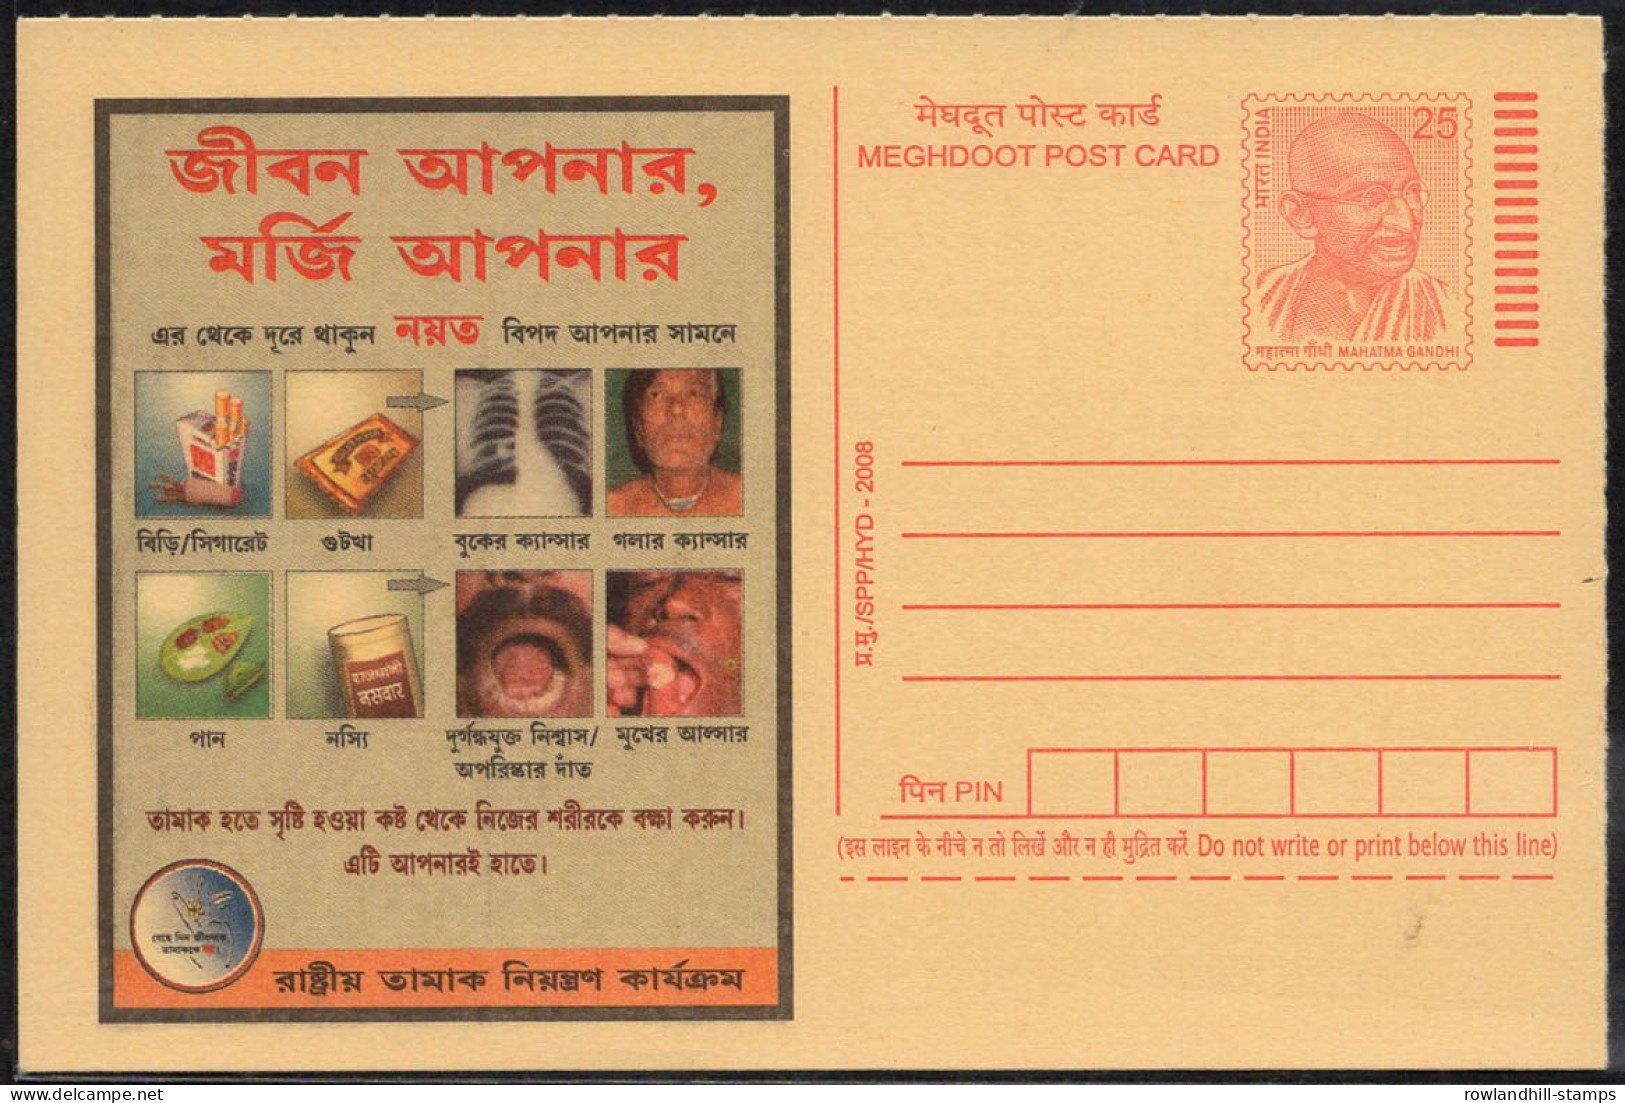 INDIA, 2008, Stop SMOKING, Tobacco, Meghdoot POST CARD, Unused, Stationery, Cigarette, Cancer, Disease Drugs, X-ray, A23 - Drogue